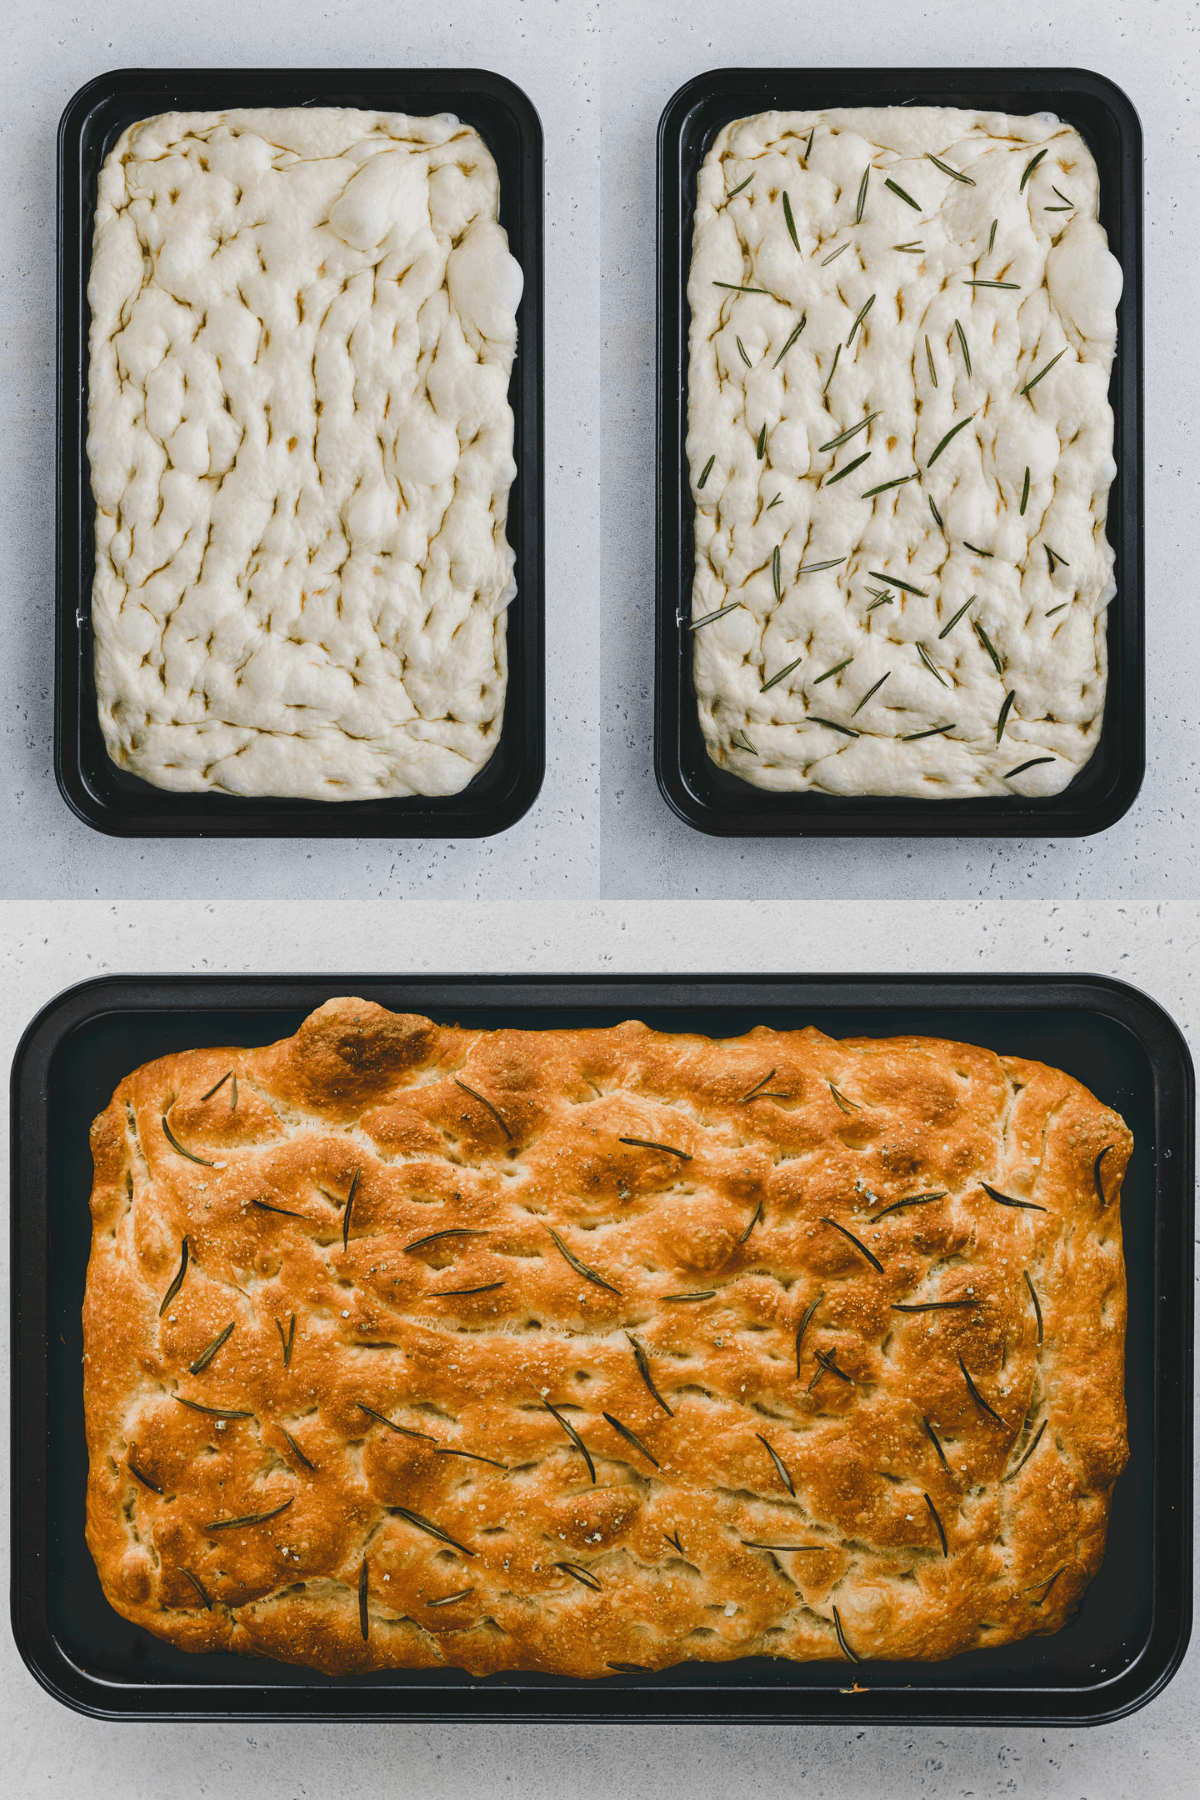 Three picture collage each of top views of focaccia making process: top left picture is of focaccia dough on a baking sheet with holes in it, top right is the same and also has fresh rosemary on it, and the bottom picture is the focaccia baked brown, just out of the oven.